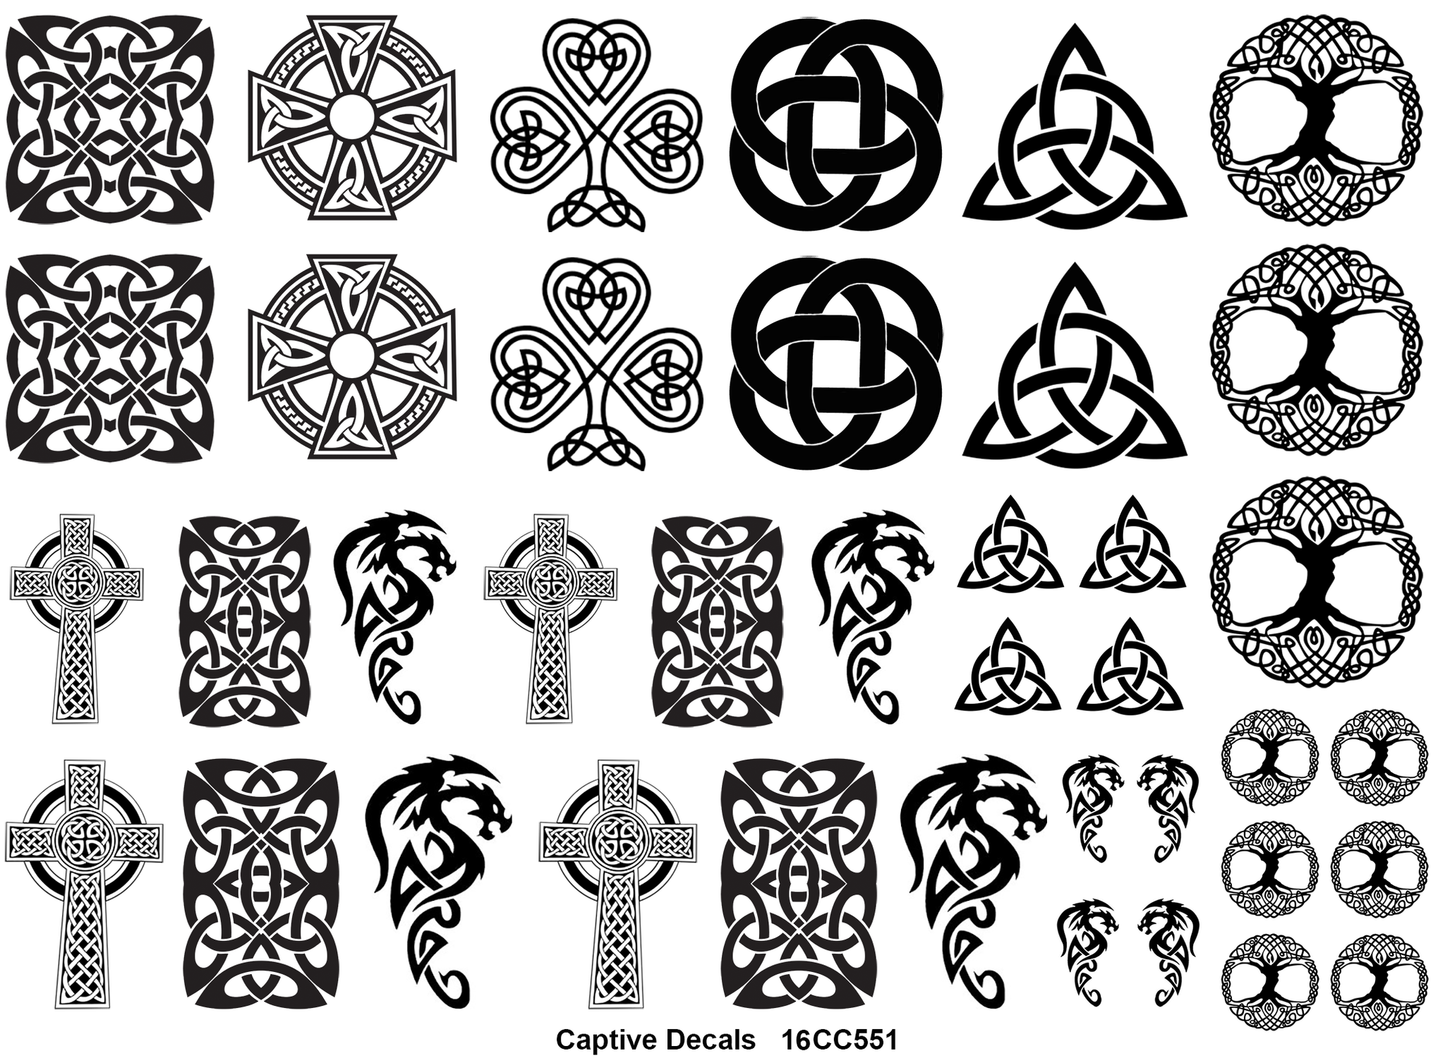 Celtic Knot Fun 39 pcs 1/2" to 1 1/4" Black Fused Glass Decals